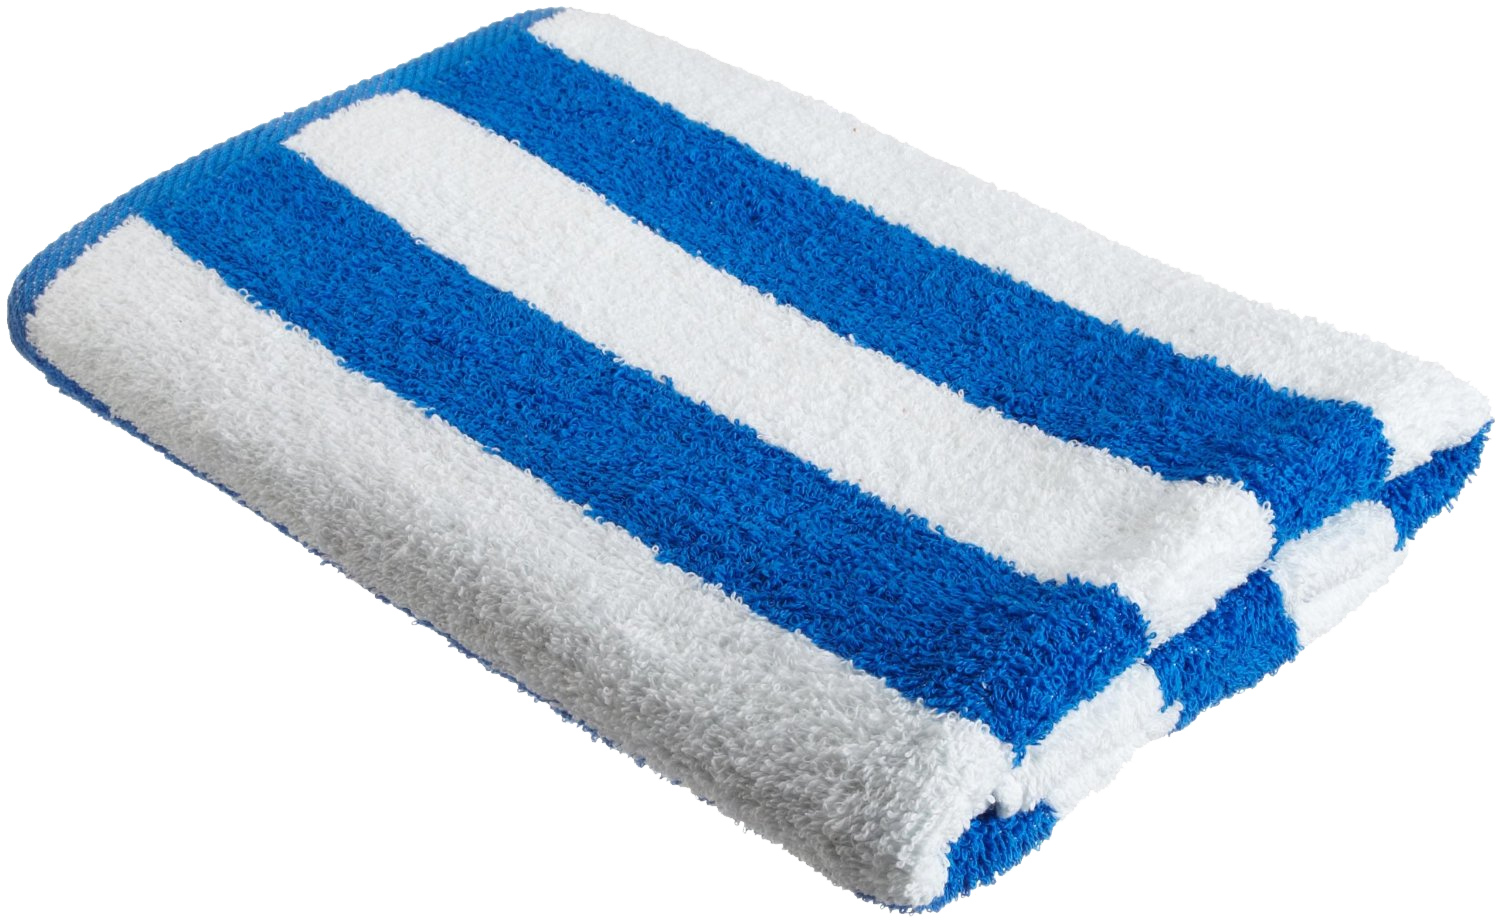 //markupgroup.net/wp-content/uploads/2019/11/pool-towel.png